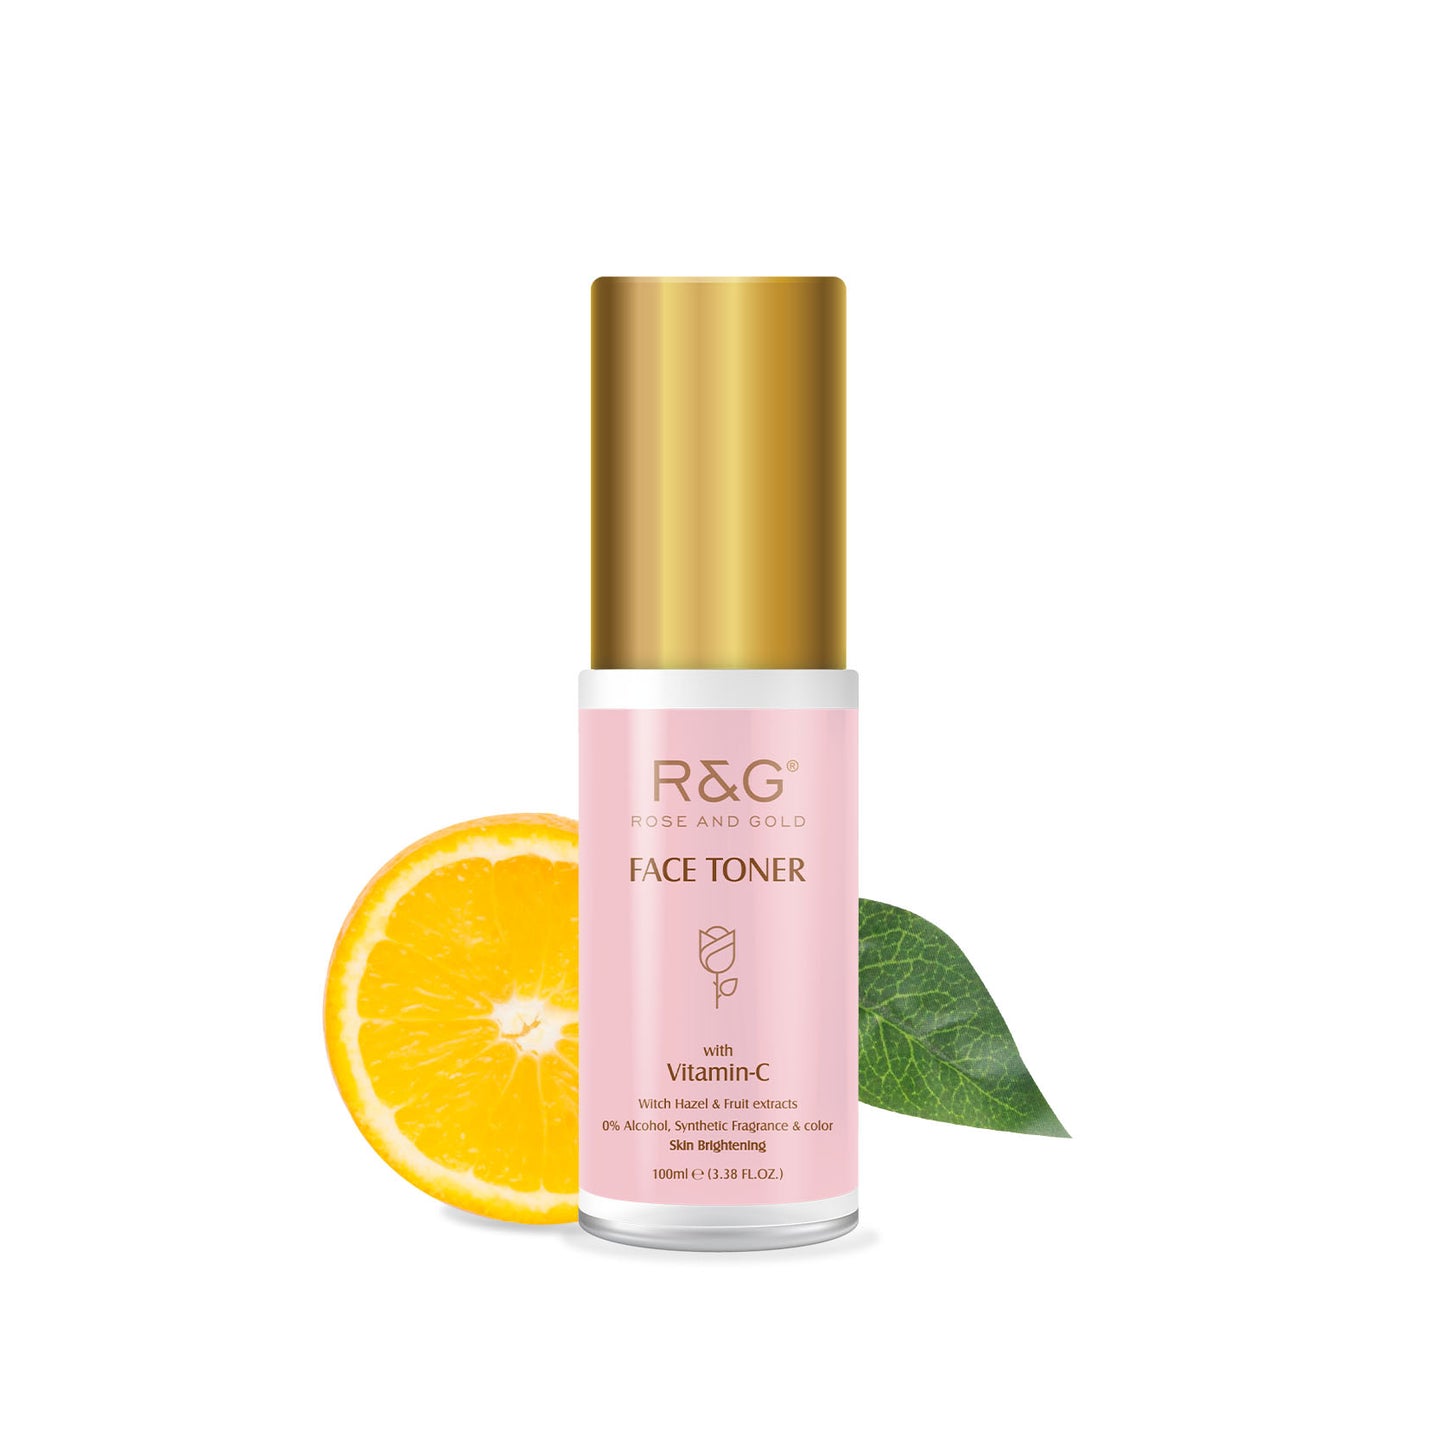 R&G Vitamin C Face Toner- 100ml - Enriched With Vitamin C & Orange Oil - Face Toner For Glowing Skin - Firms & Tightens Pores - Restore Skin’s pH Balance - Alcohol-Free Toner For Refreshing Skin